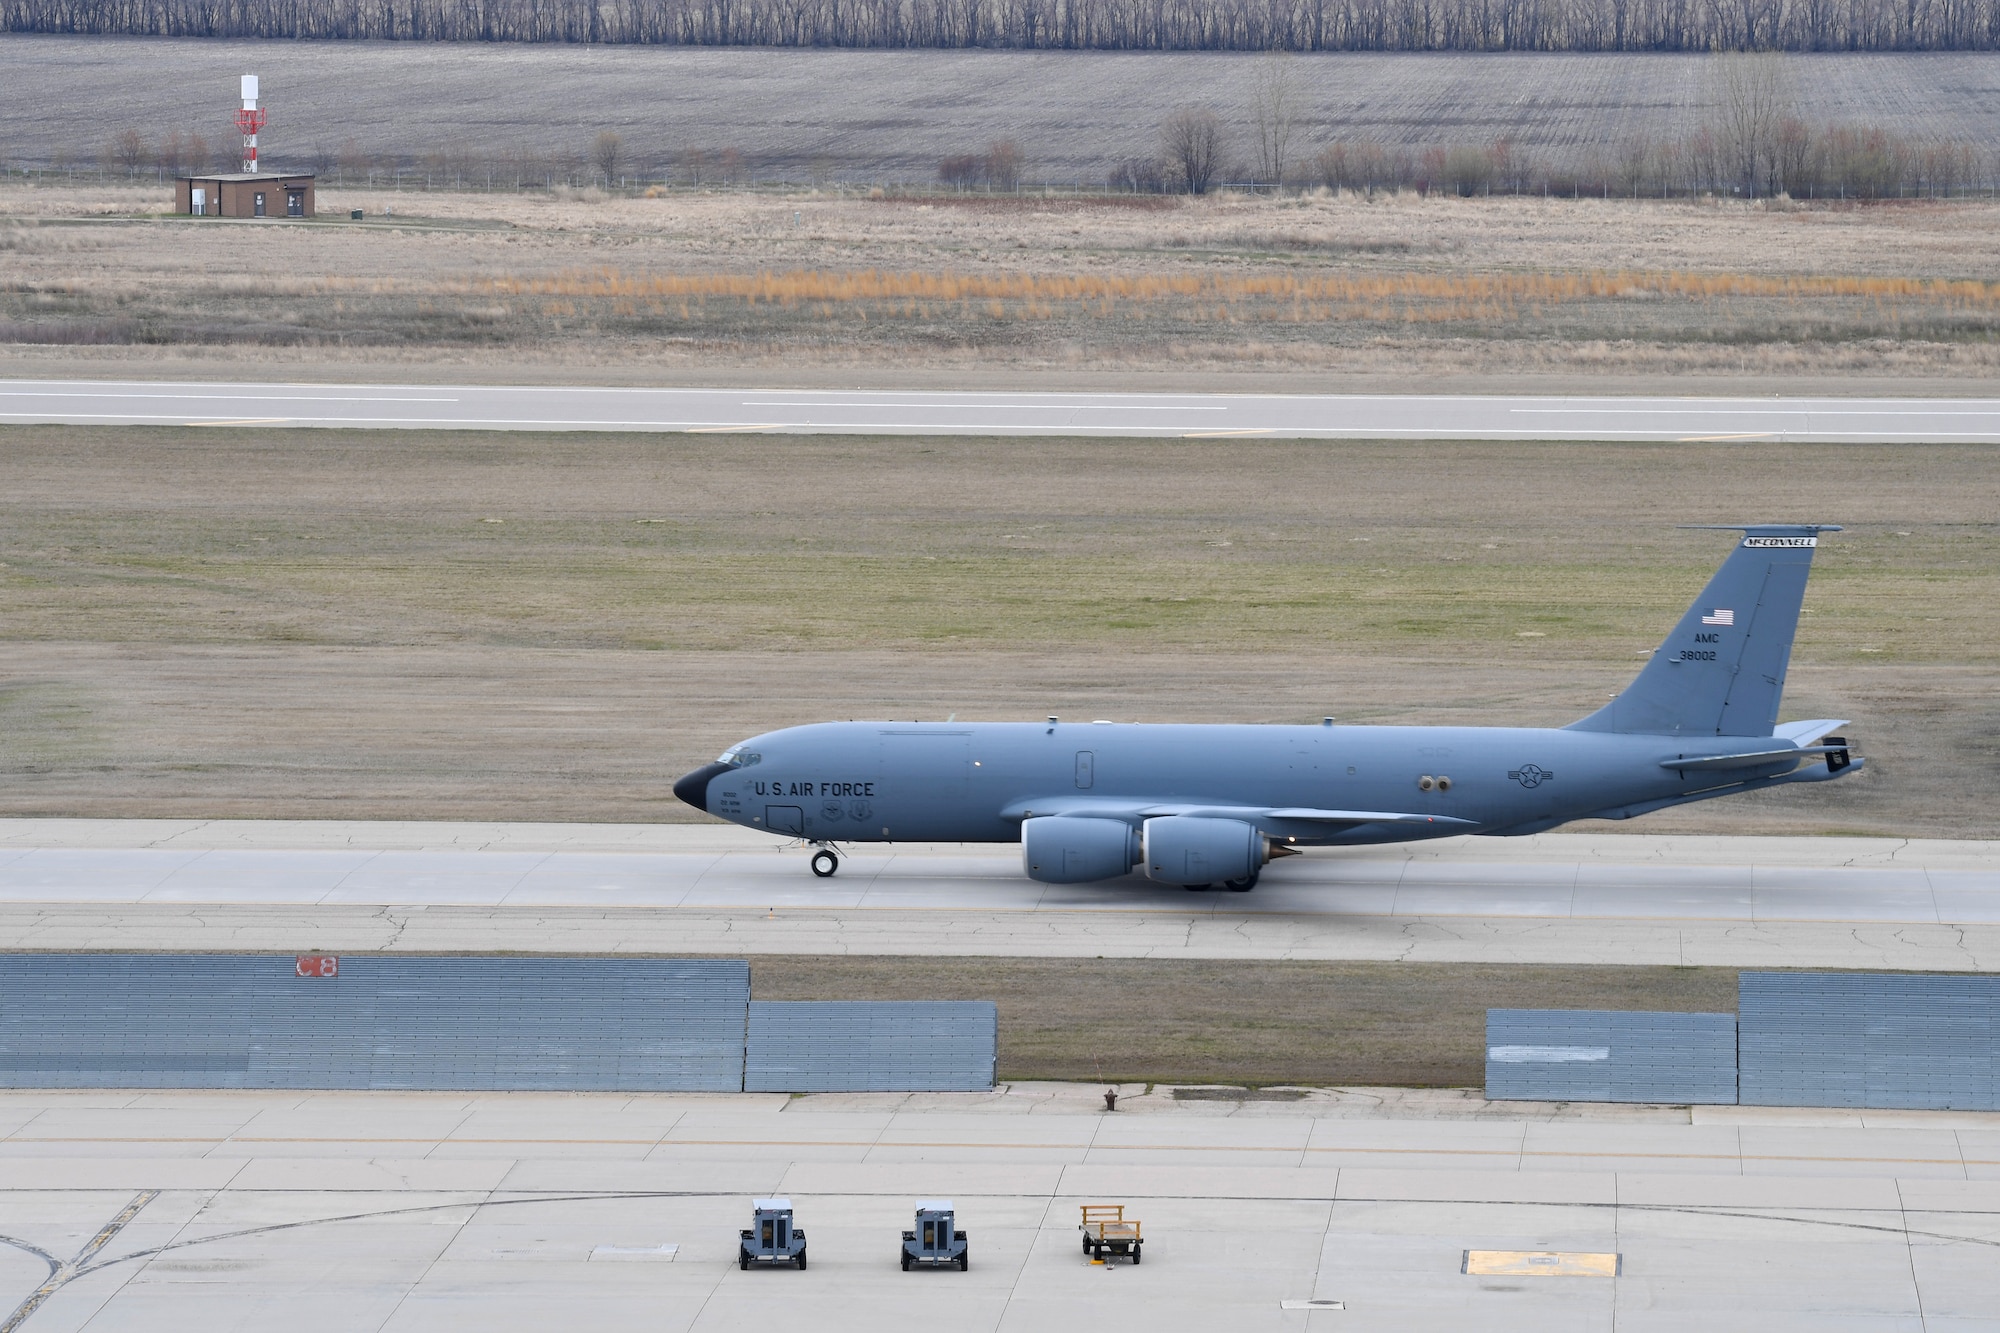 A KC-135 Stratotanker, assigned to the 22nd Air Refueling Wing, taxis to the parking ramp May 6, 2019, on Grand Forks Air Force Base, North Dakota. The KC-135 is a familiar face in Grand Forks AFB’s history, having been a part of its mission for 50 years, but was completely replaced by the current RQ-4 Global Hawk operations in 2010. (U.S. Air Force photo by Senior Airman Elora J. Martinez)